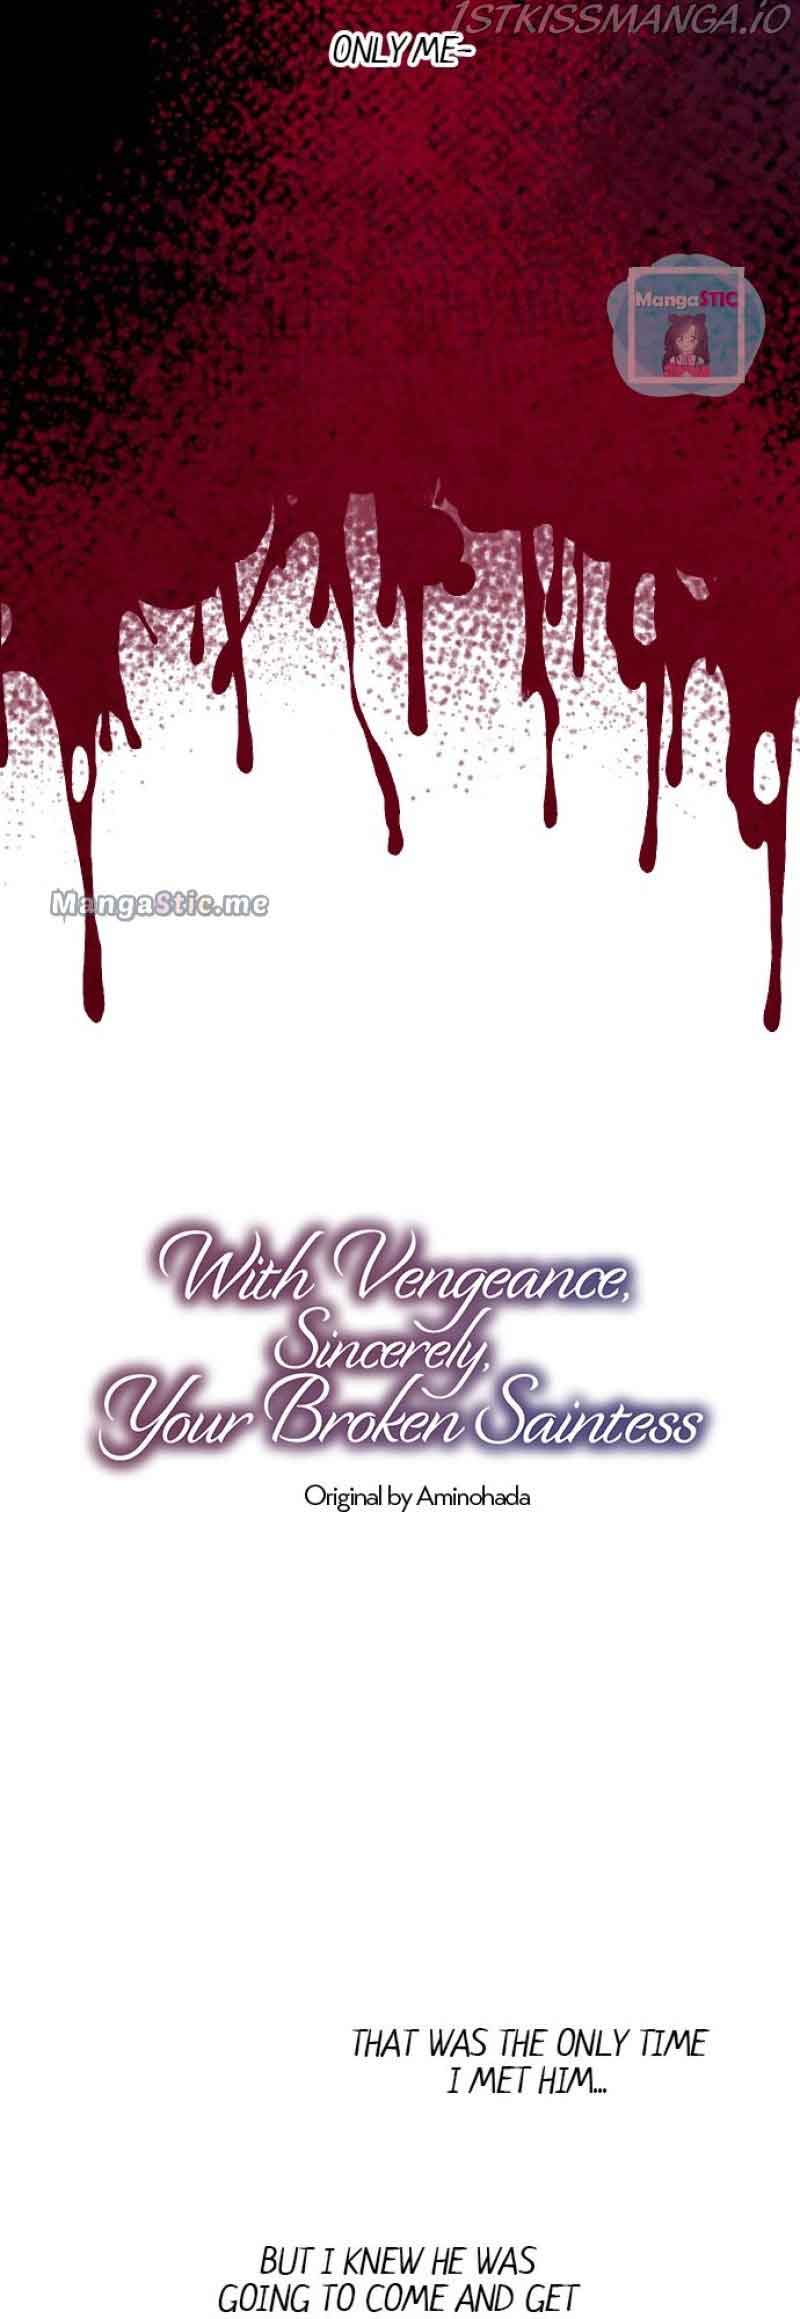 Vengeance from a Saint Full of Wounds chapter 27